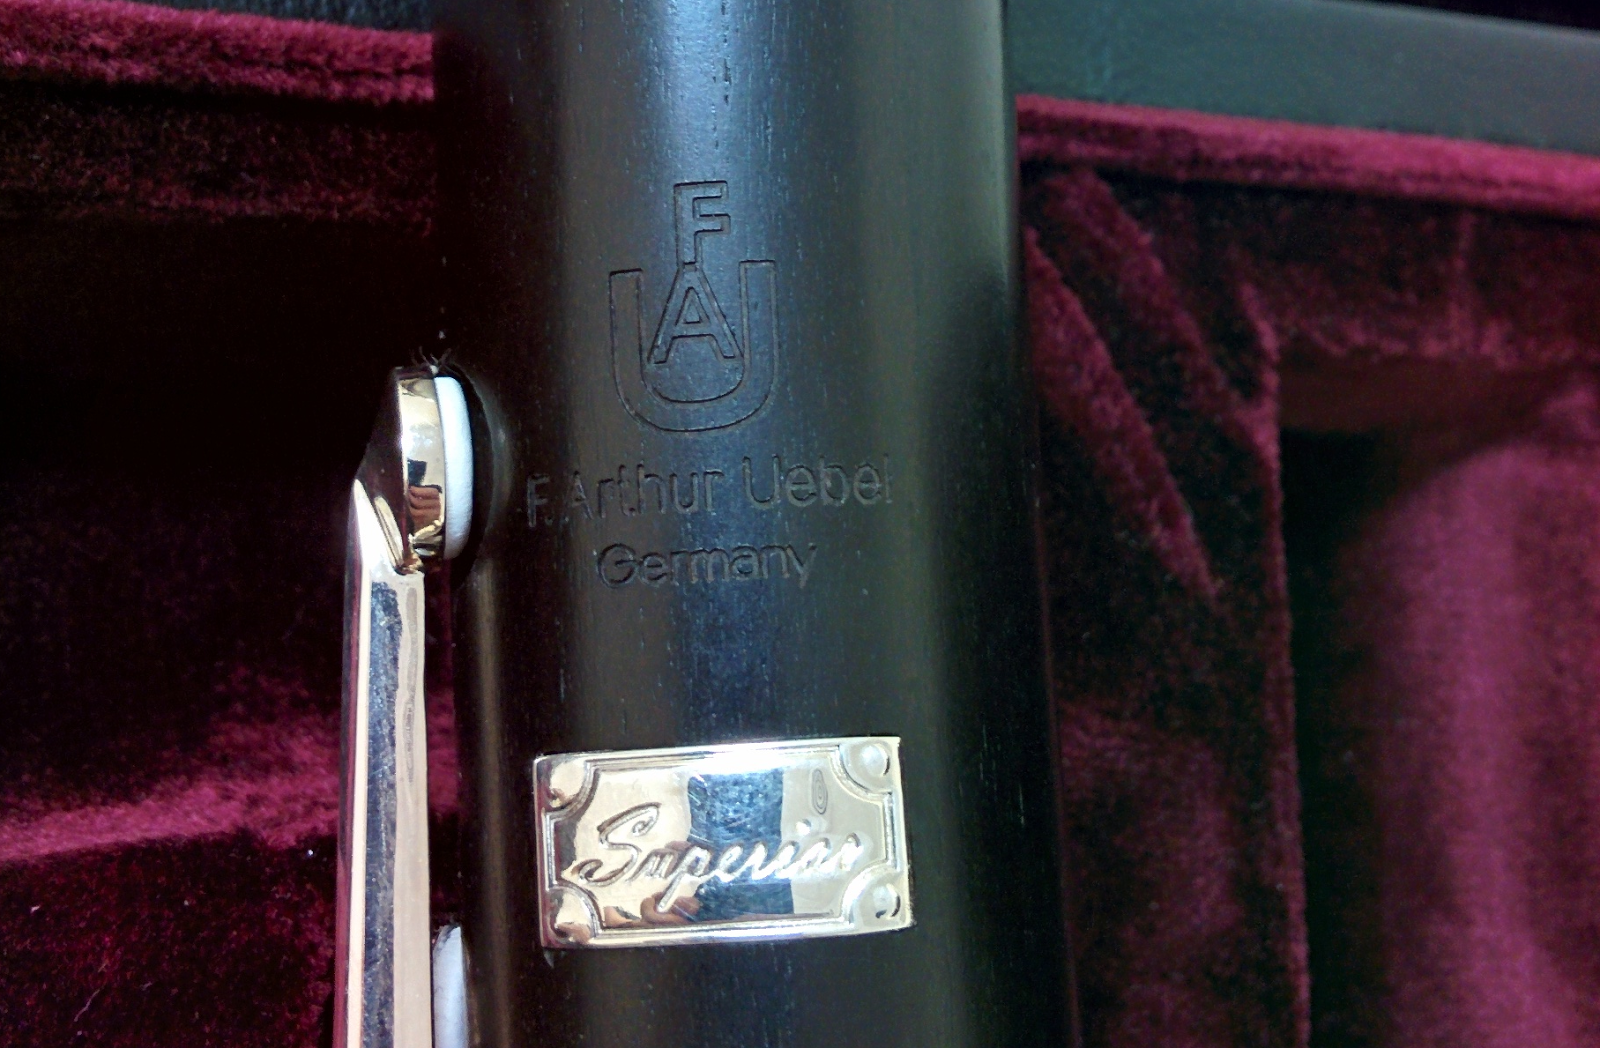 The Uebel Superior: Why Yes, Yes It Is!